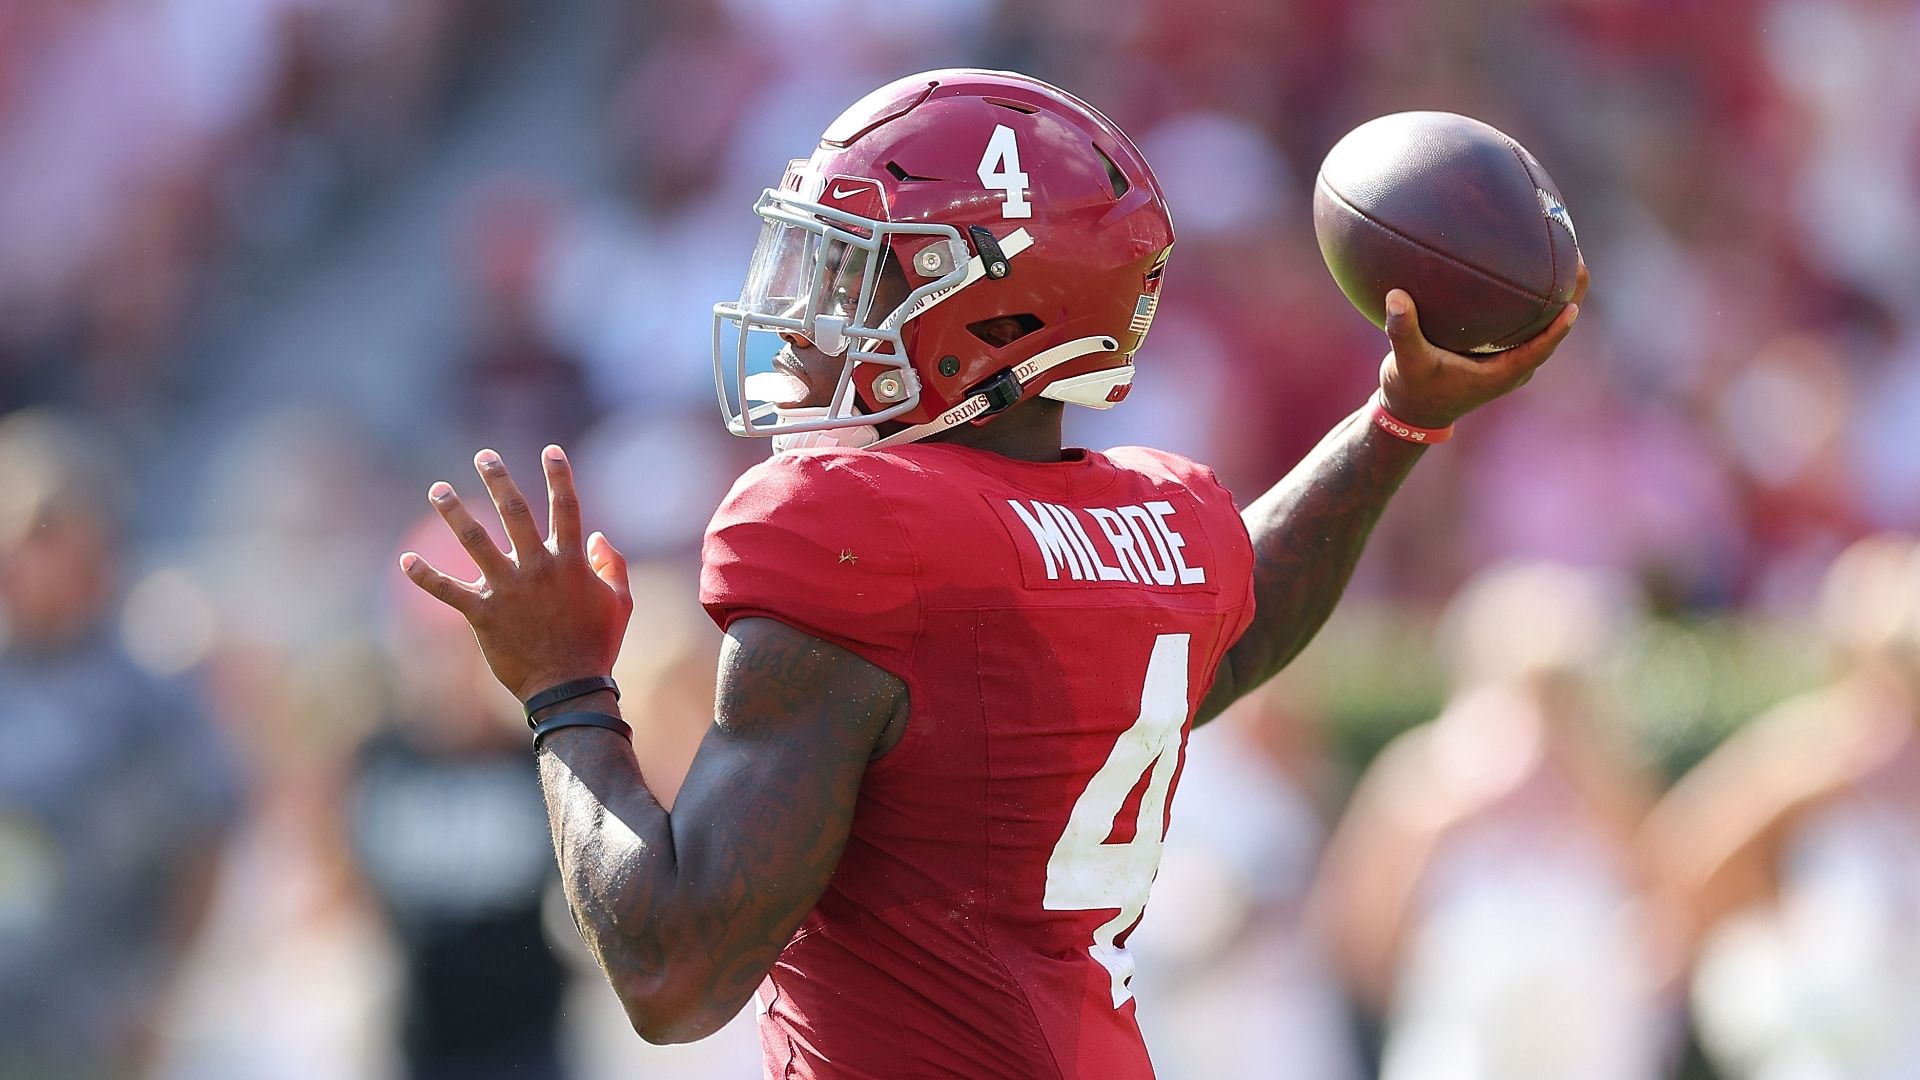 McElroy on Bama's Milroe's confidence, decision-making